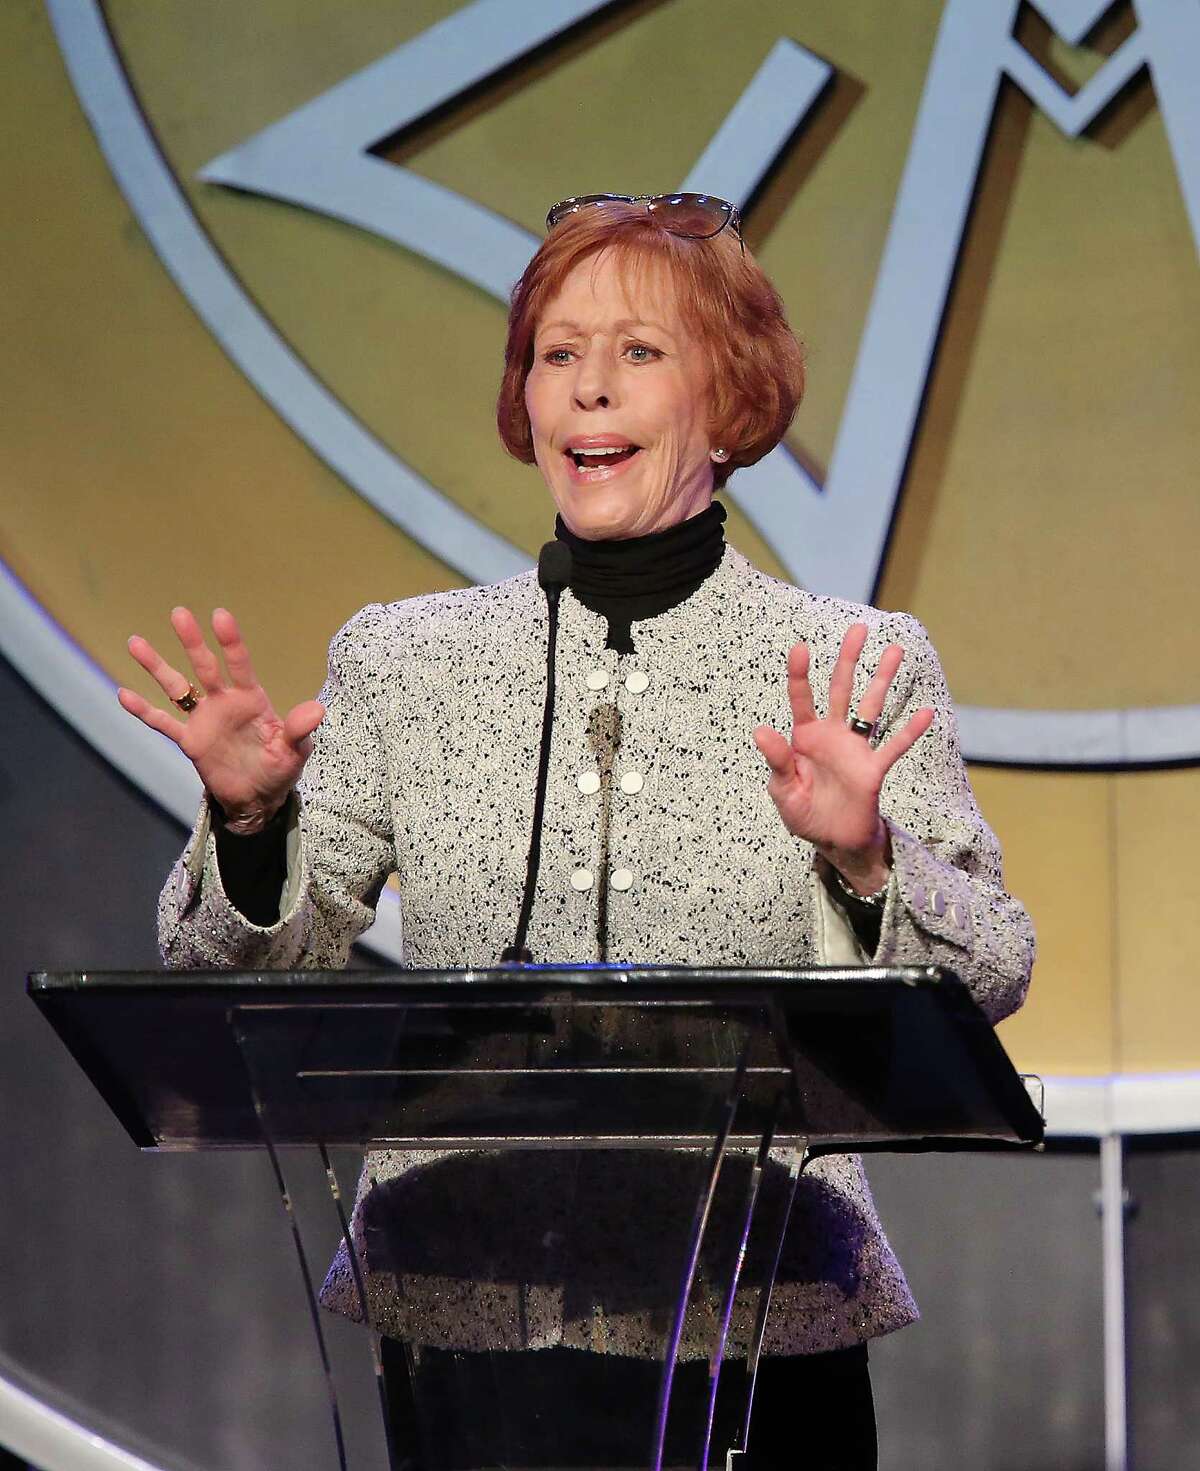 Carol Burnett will be honored in 2016 with a Texas Film Award by the Austin Film Society.